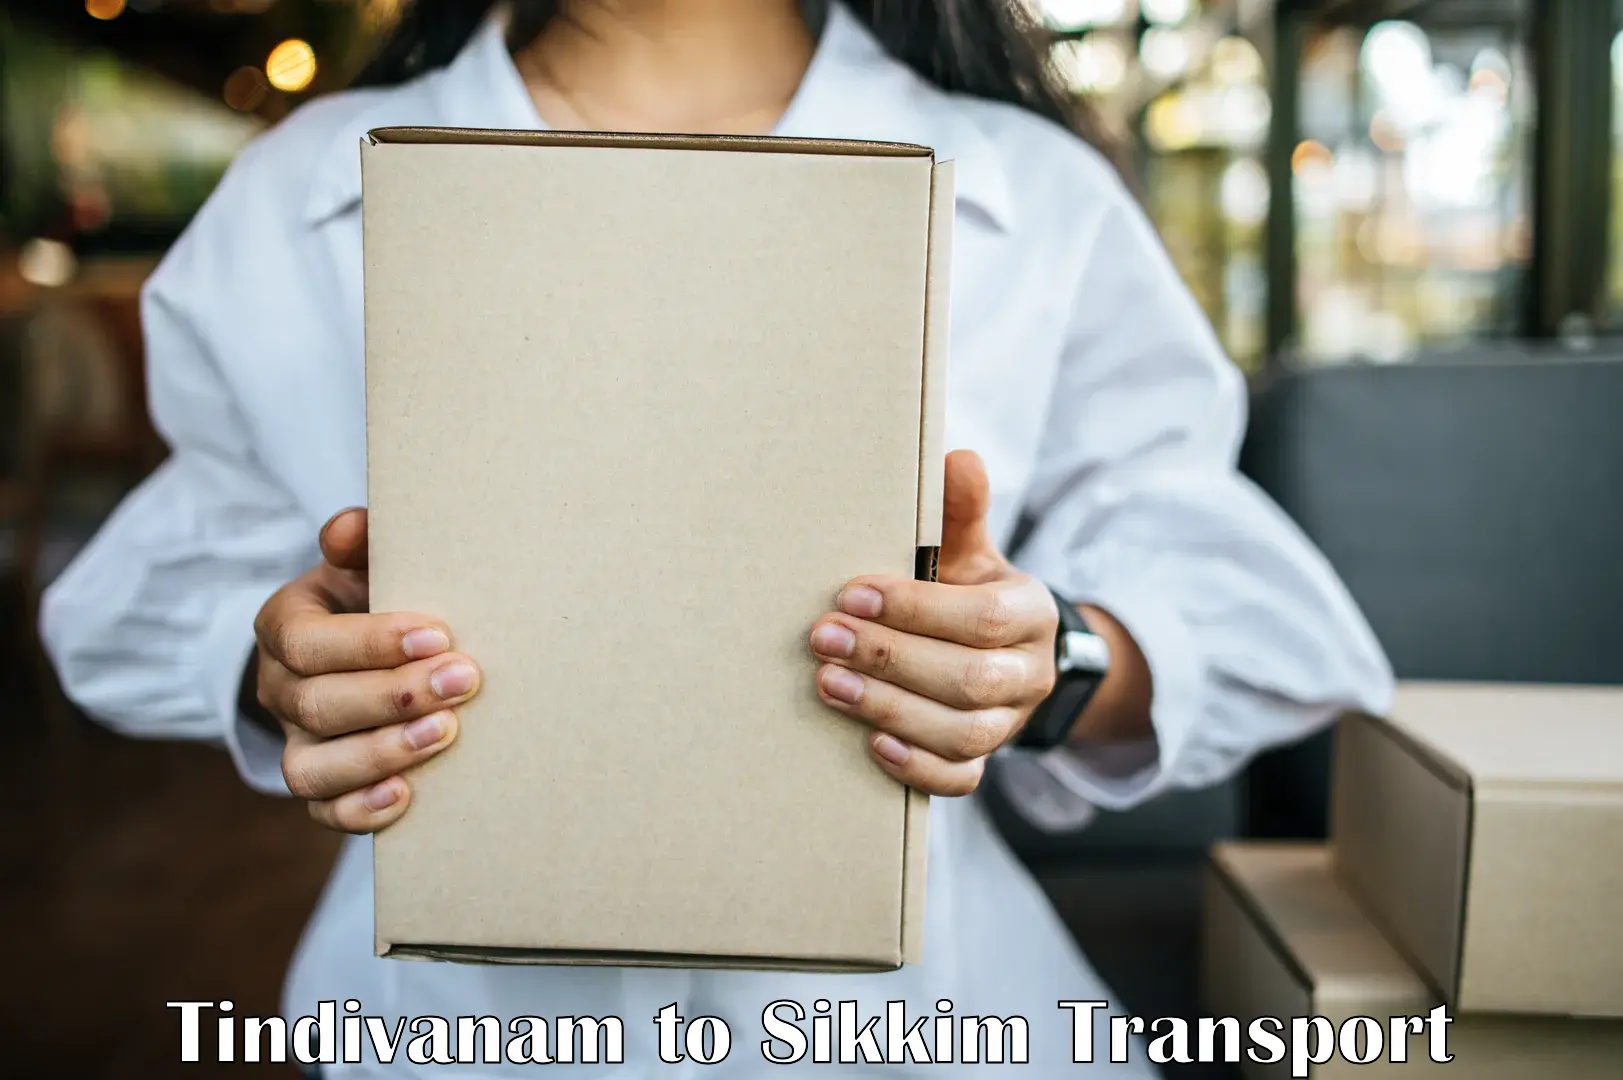 Commercial transport service Tindivanam to East Sikkim